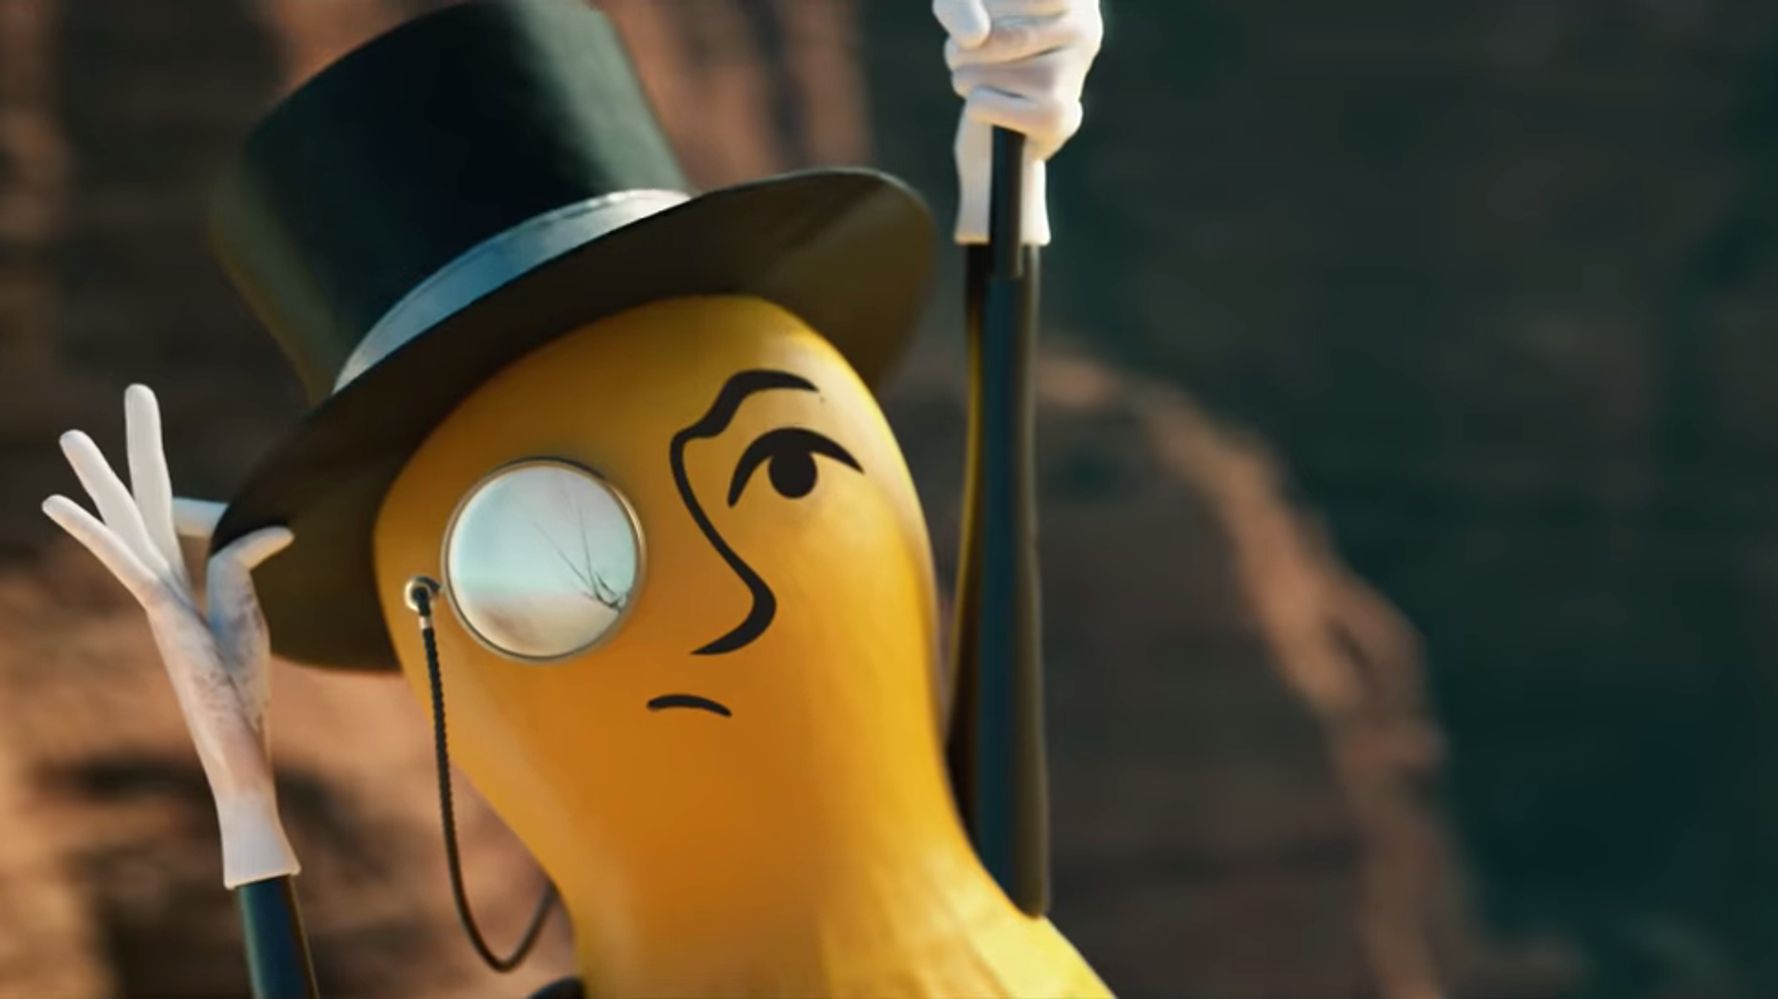 Mr. Peanut Apparently Died, And Everyone Thinks He’s In Hell.